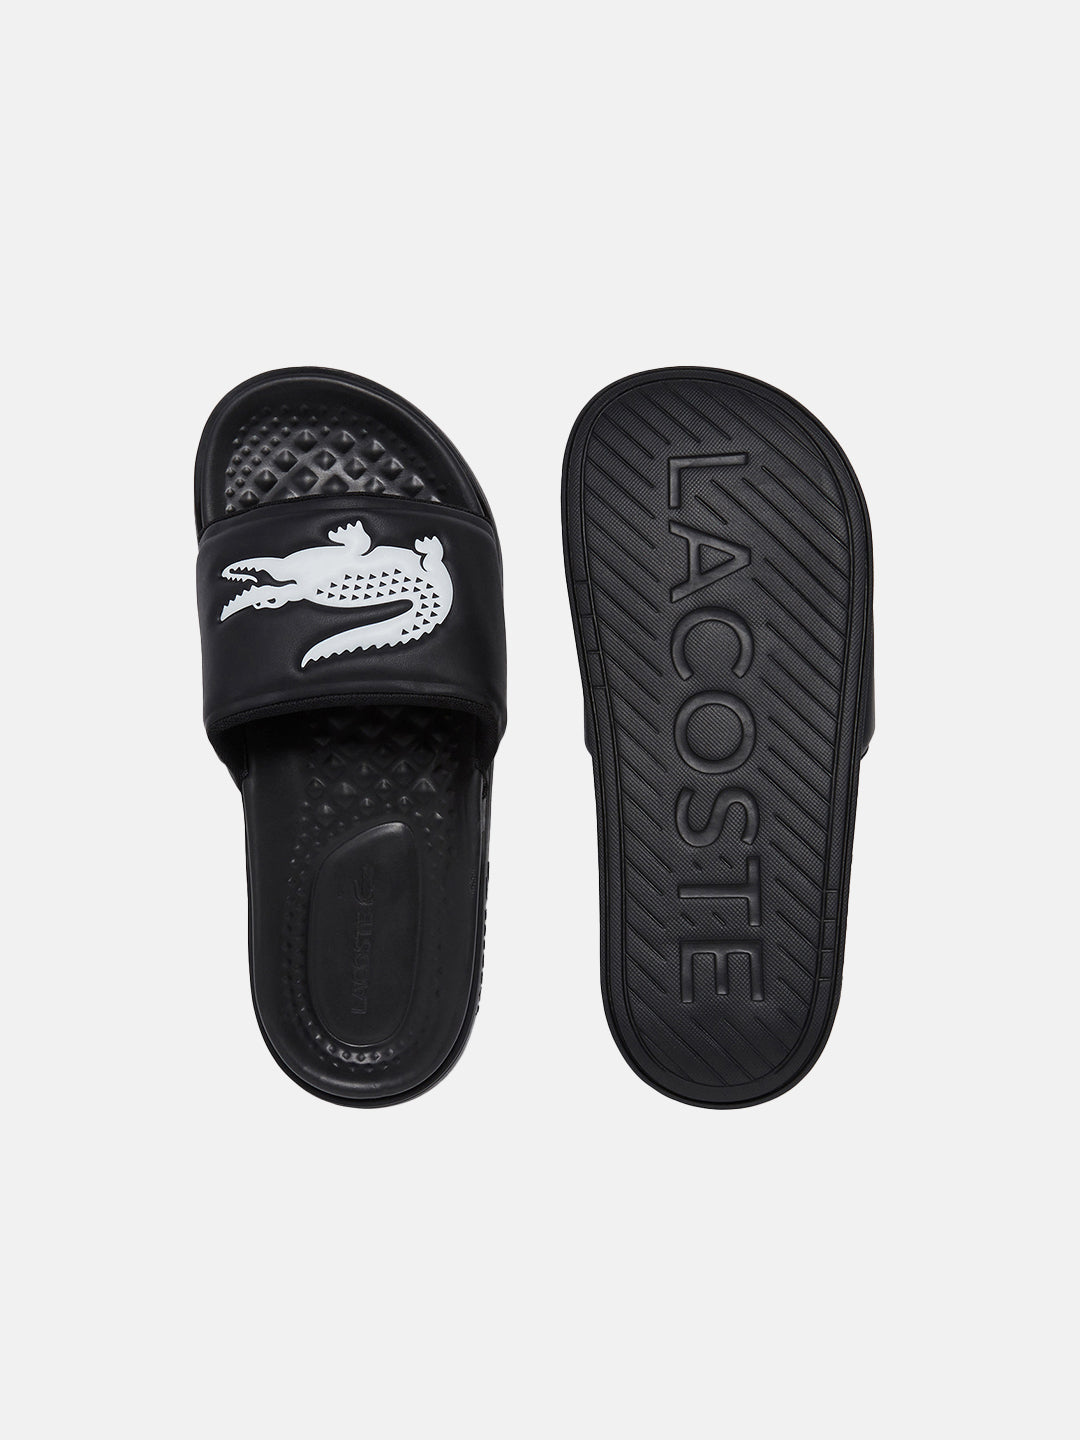 Lacoste slippers black